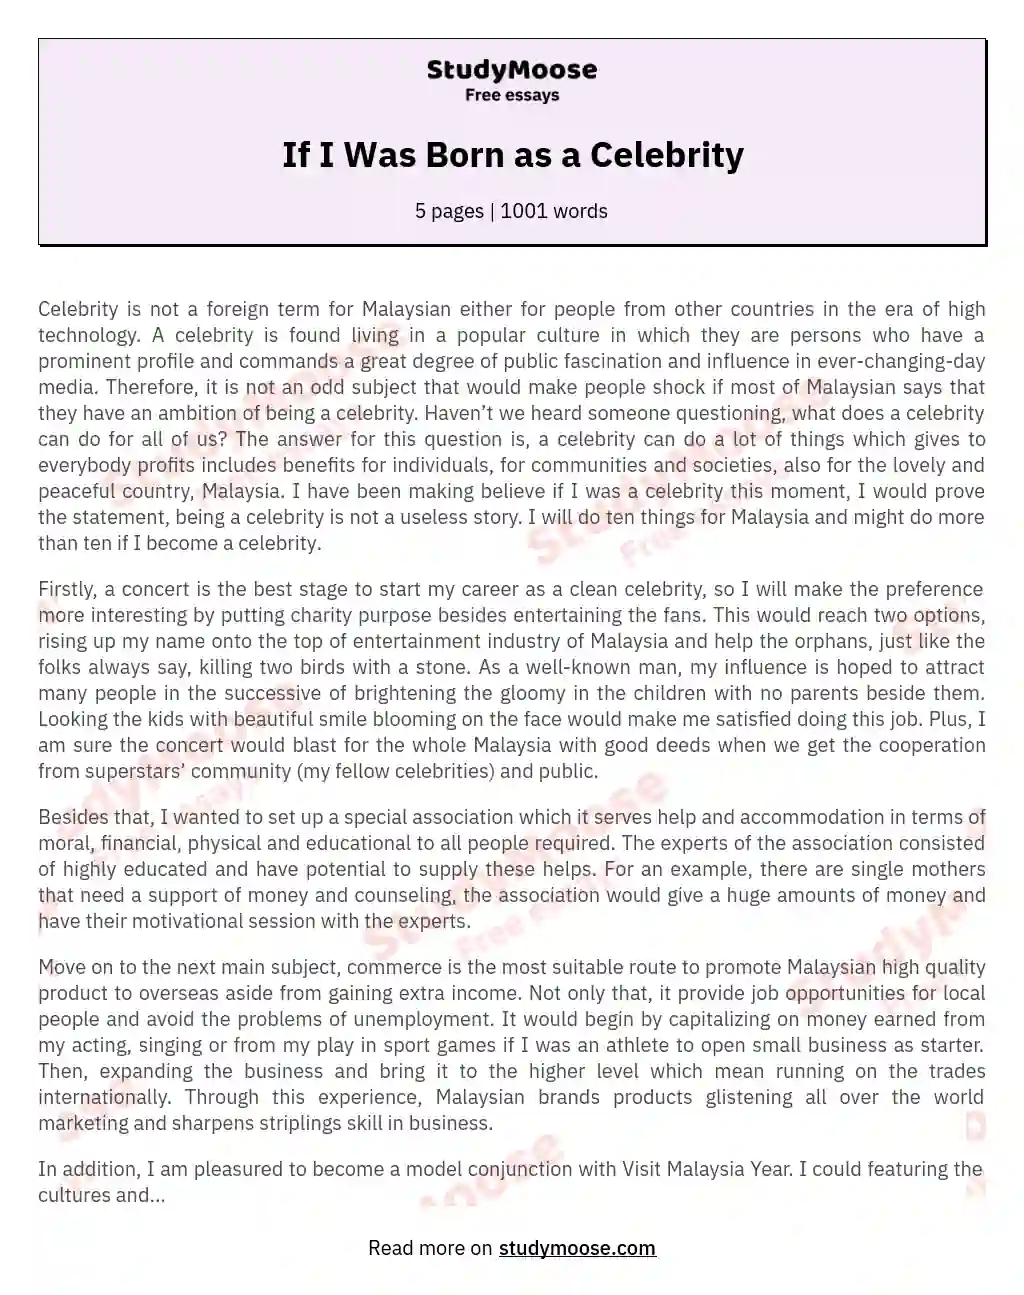 If I Was Born as a Celebrity essay